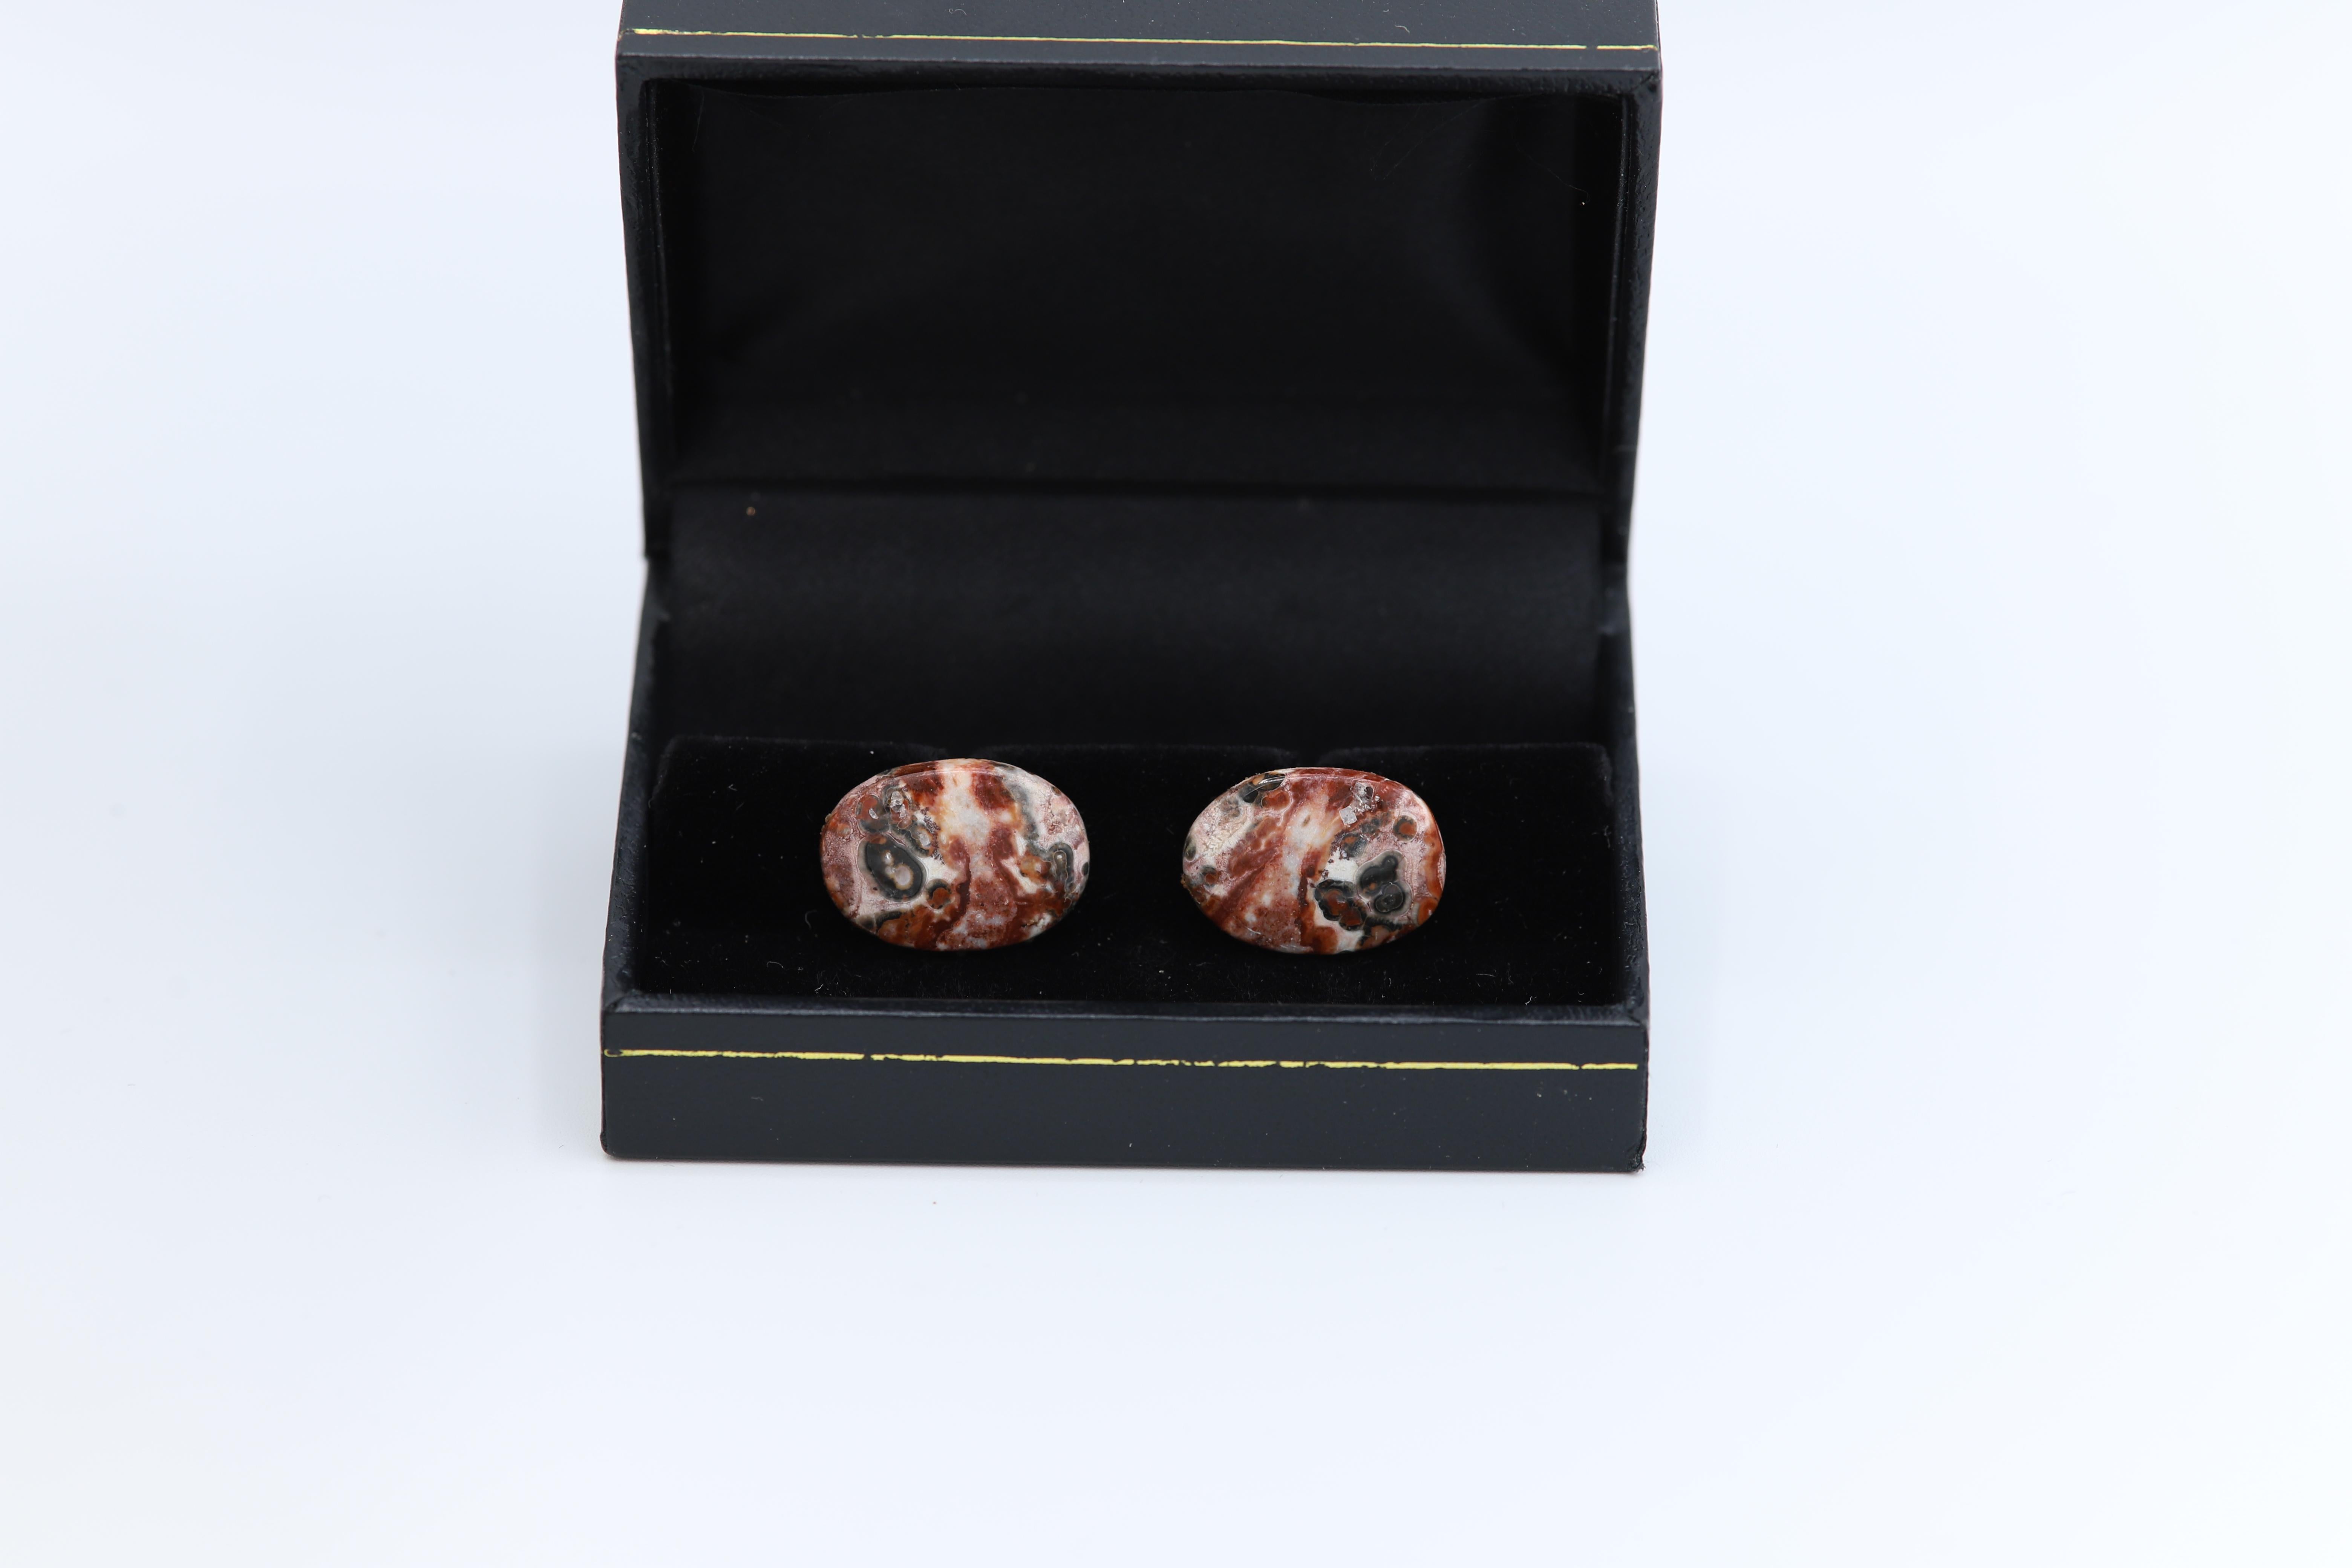 New unique men's cufflink - natural stone.
Stone name: Leopard skin Jasper
Approx. size 19 X 14 MM
Beautiful natural texture.
Imperfection may exist due to natural formations.
Back part metal is a general alloy metal - none precious
Gift Box